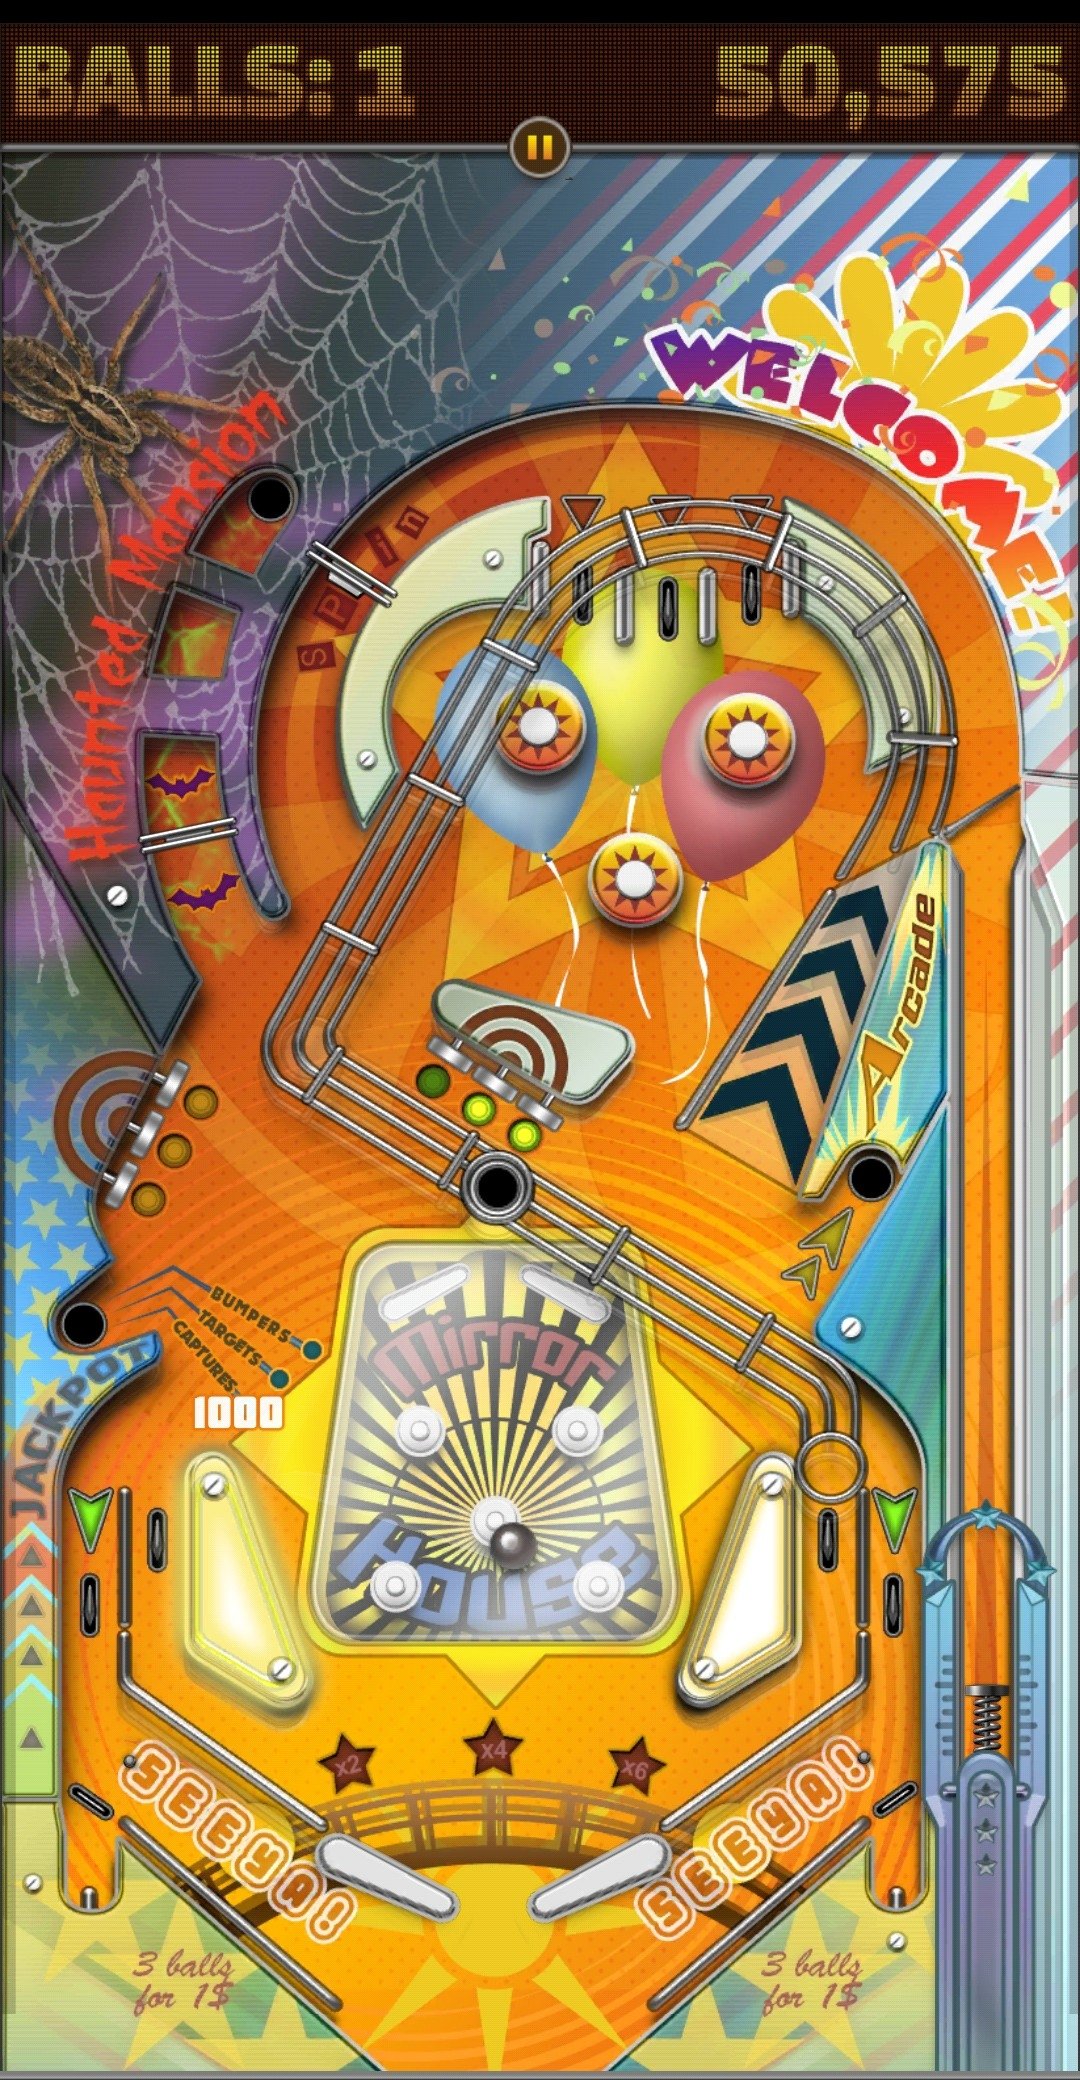 Pinball Star download the new for android